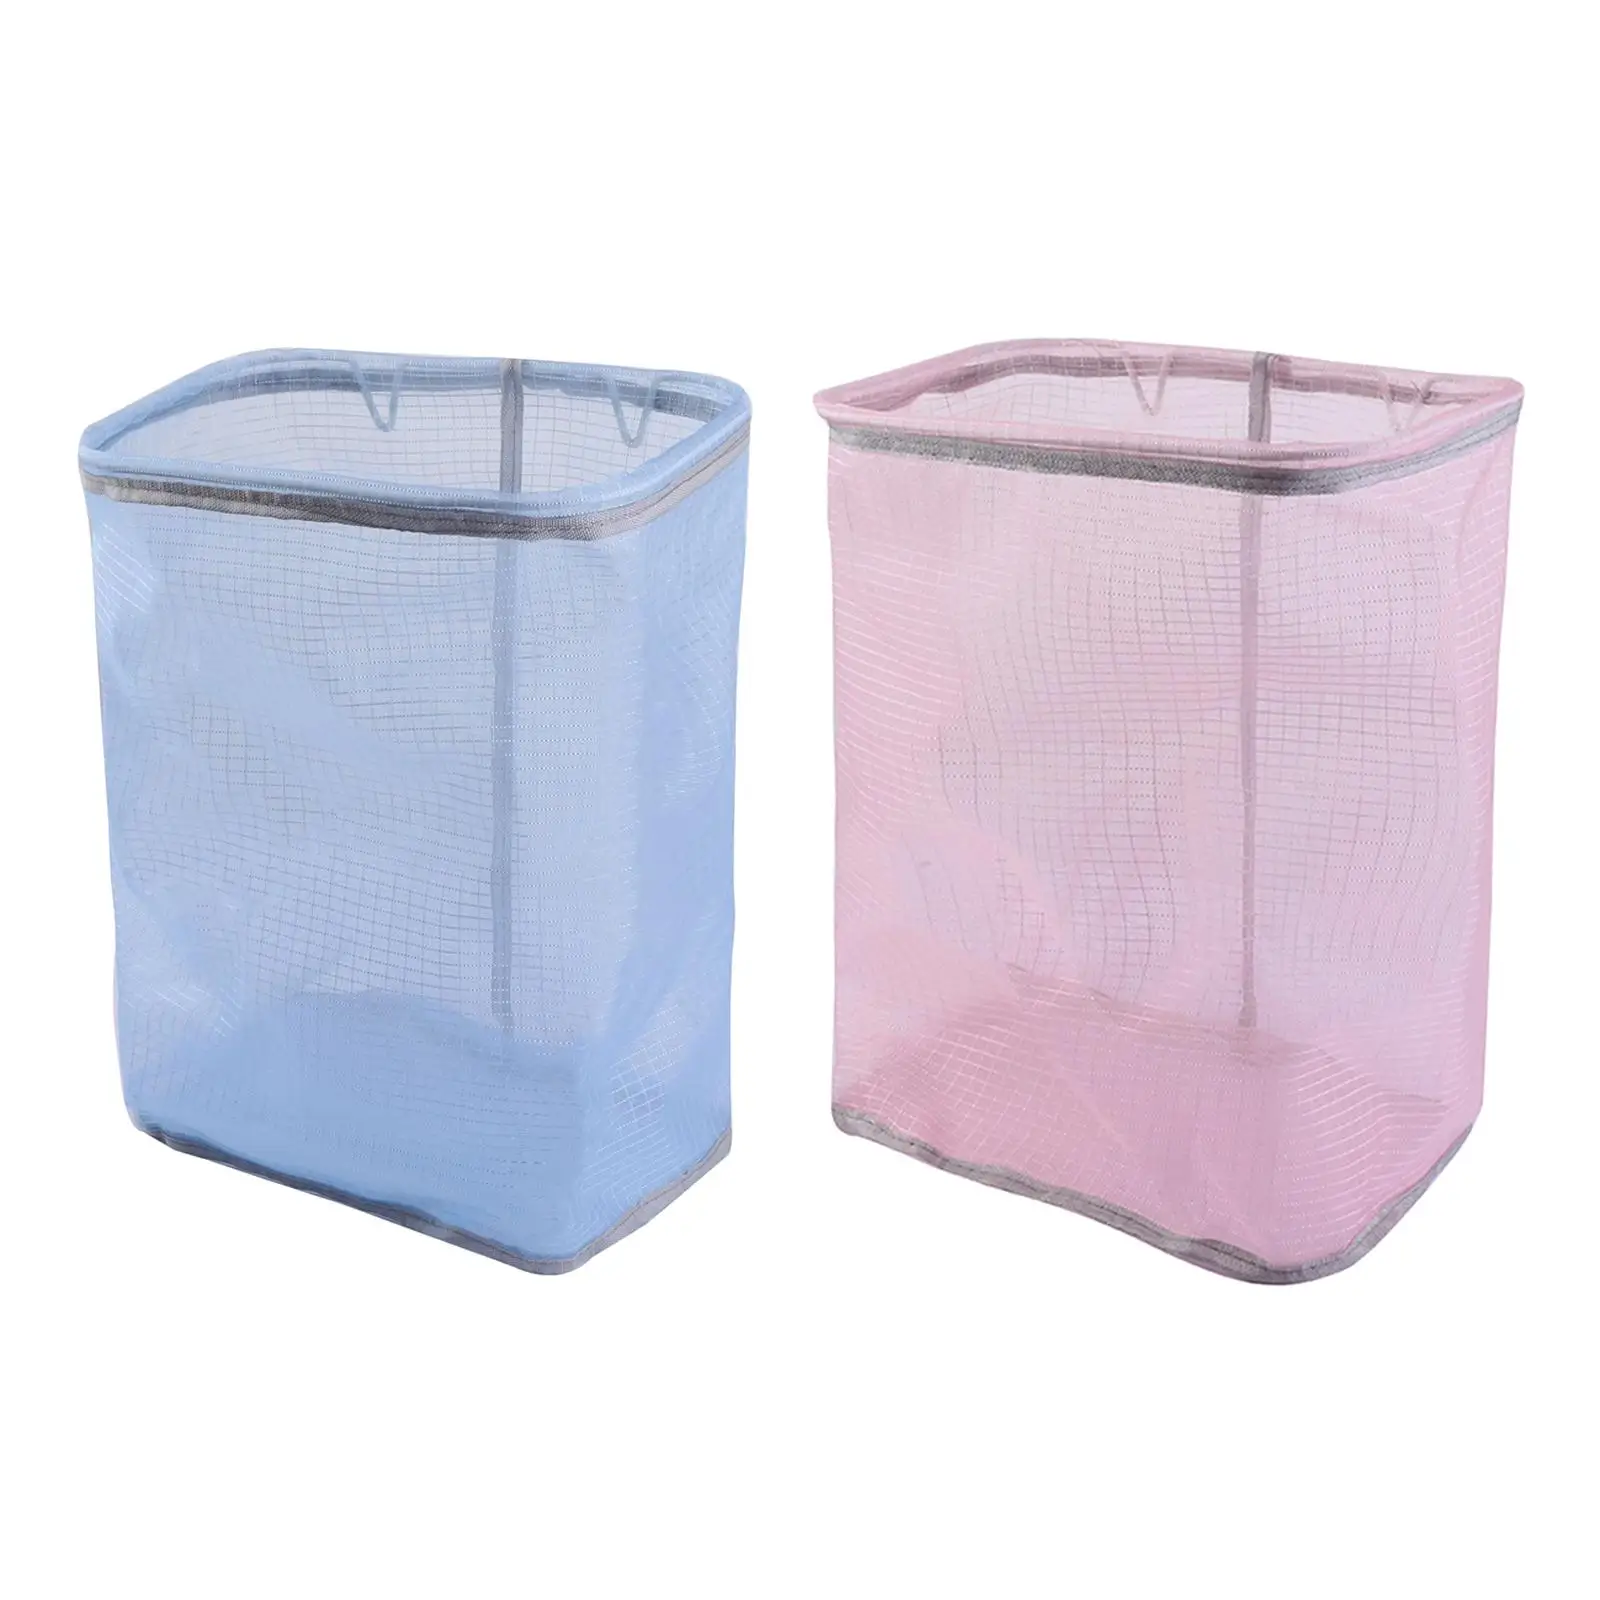 Collapsible Laundry Hamper Hanging Organizer Large Sized for Laundry Room